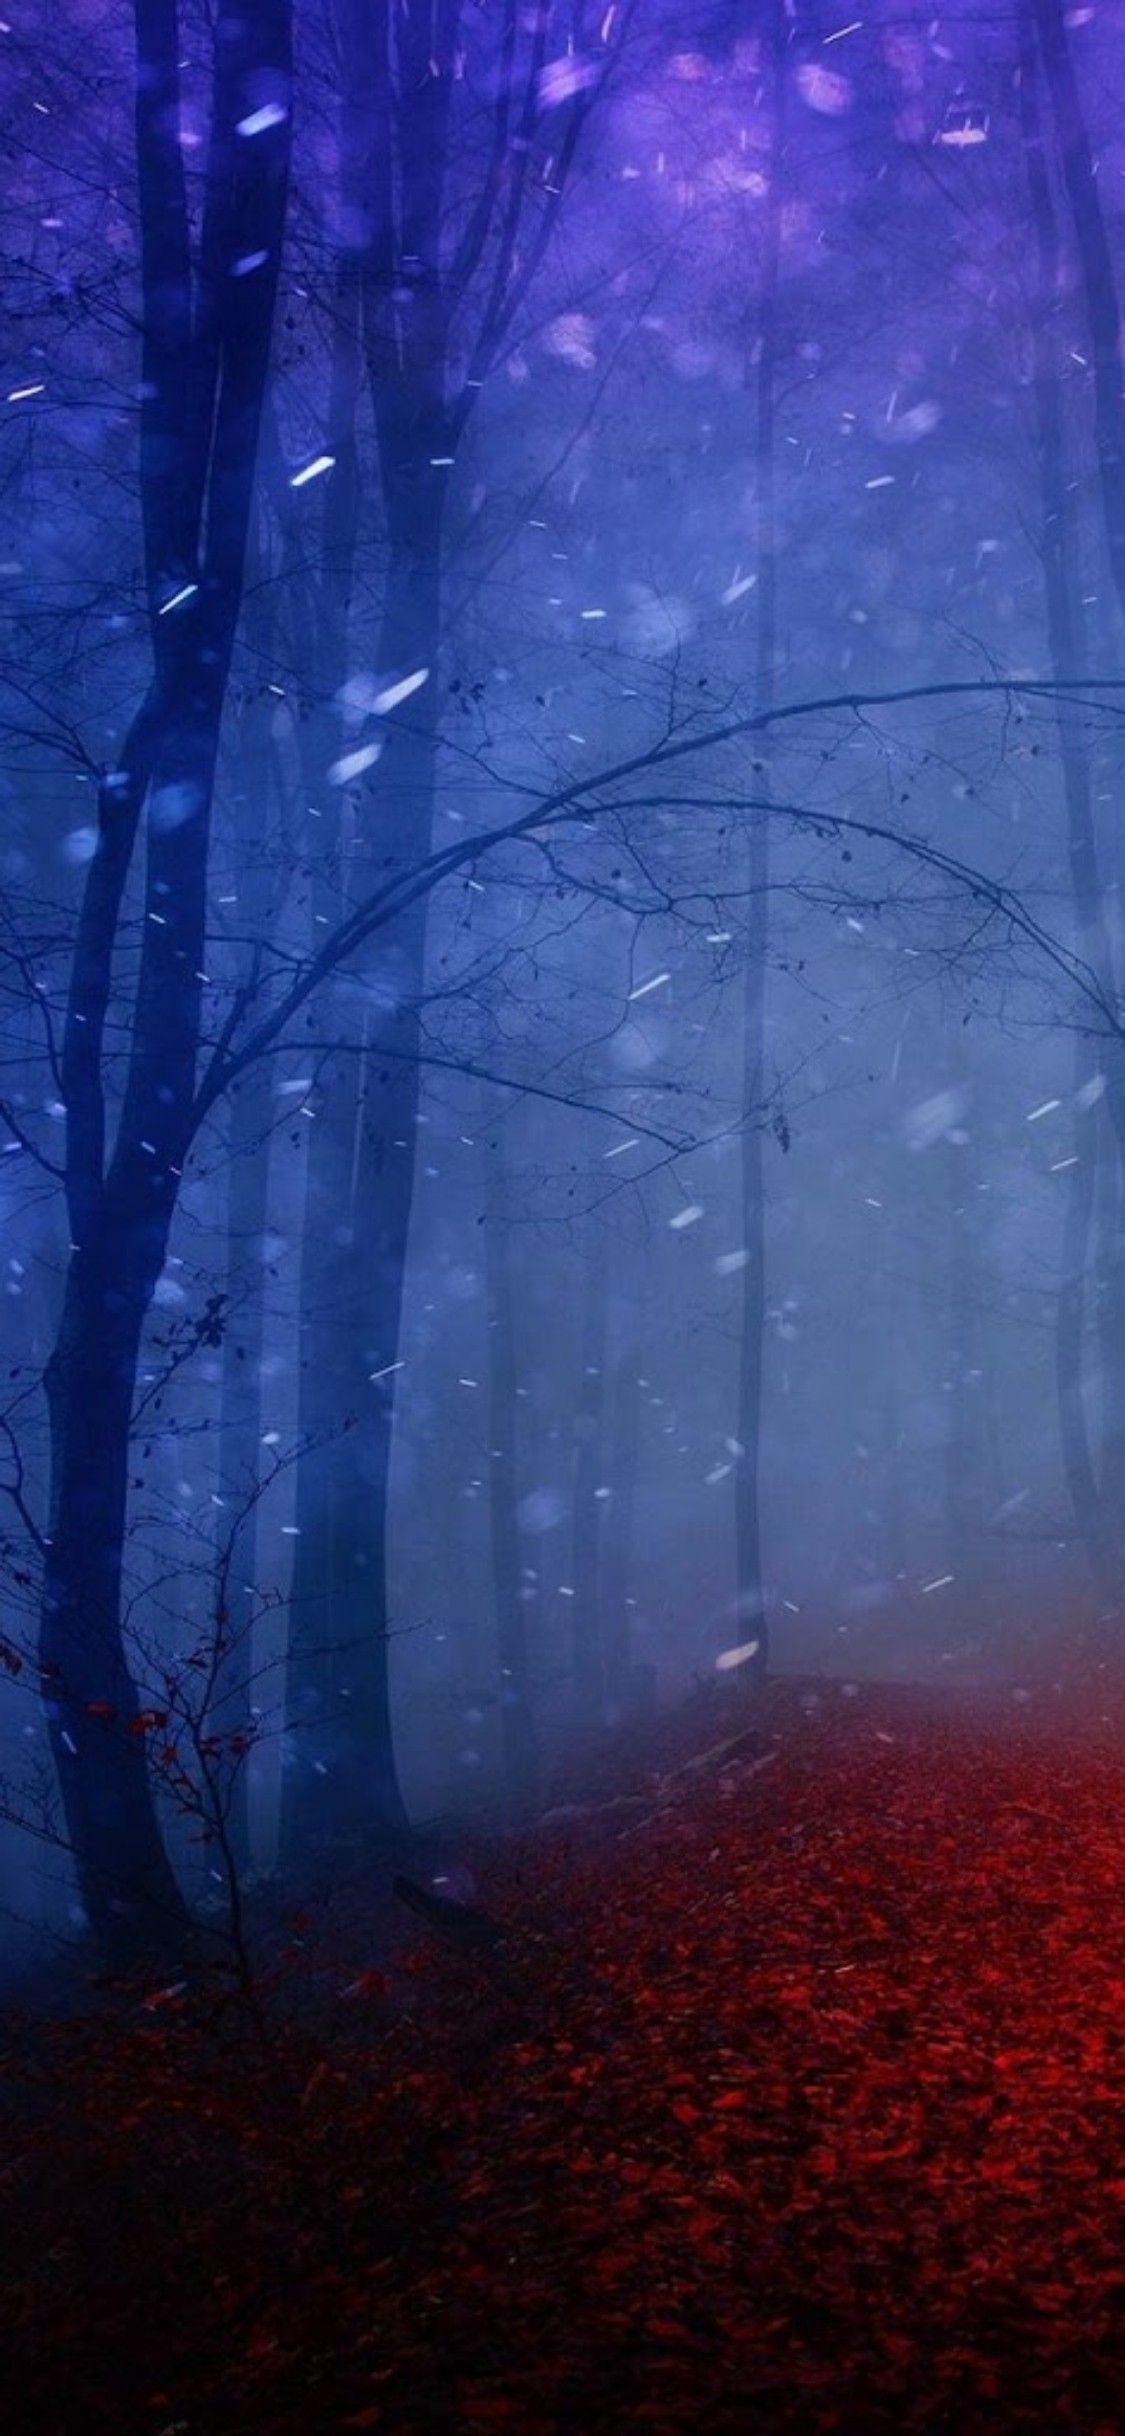 iOS iPhone X, snow, night, red, trees, woods, nature